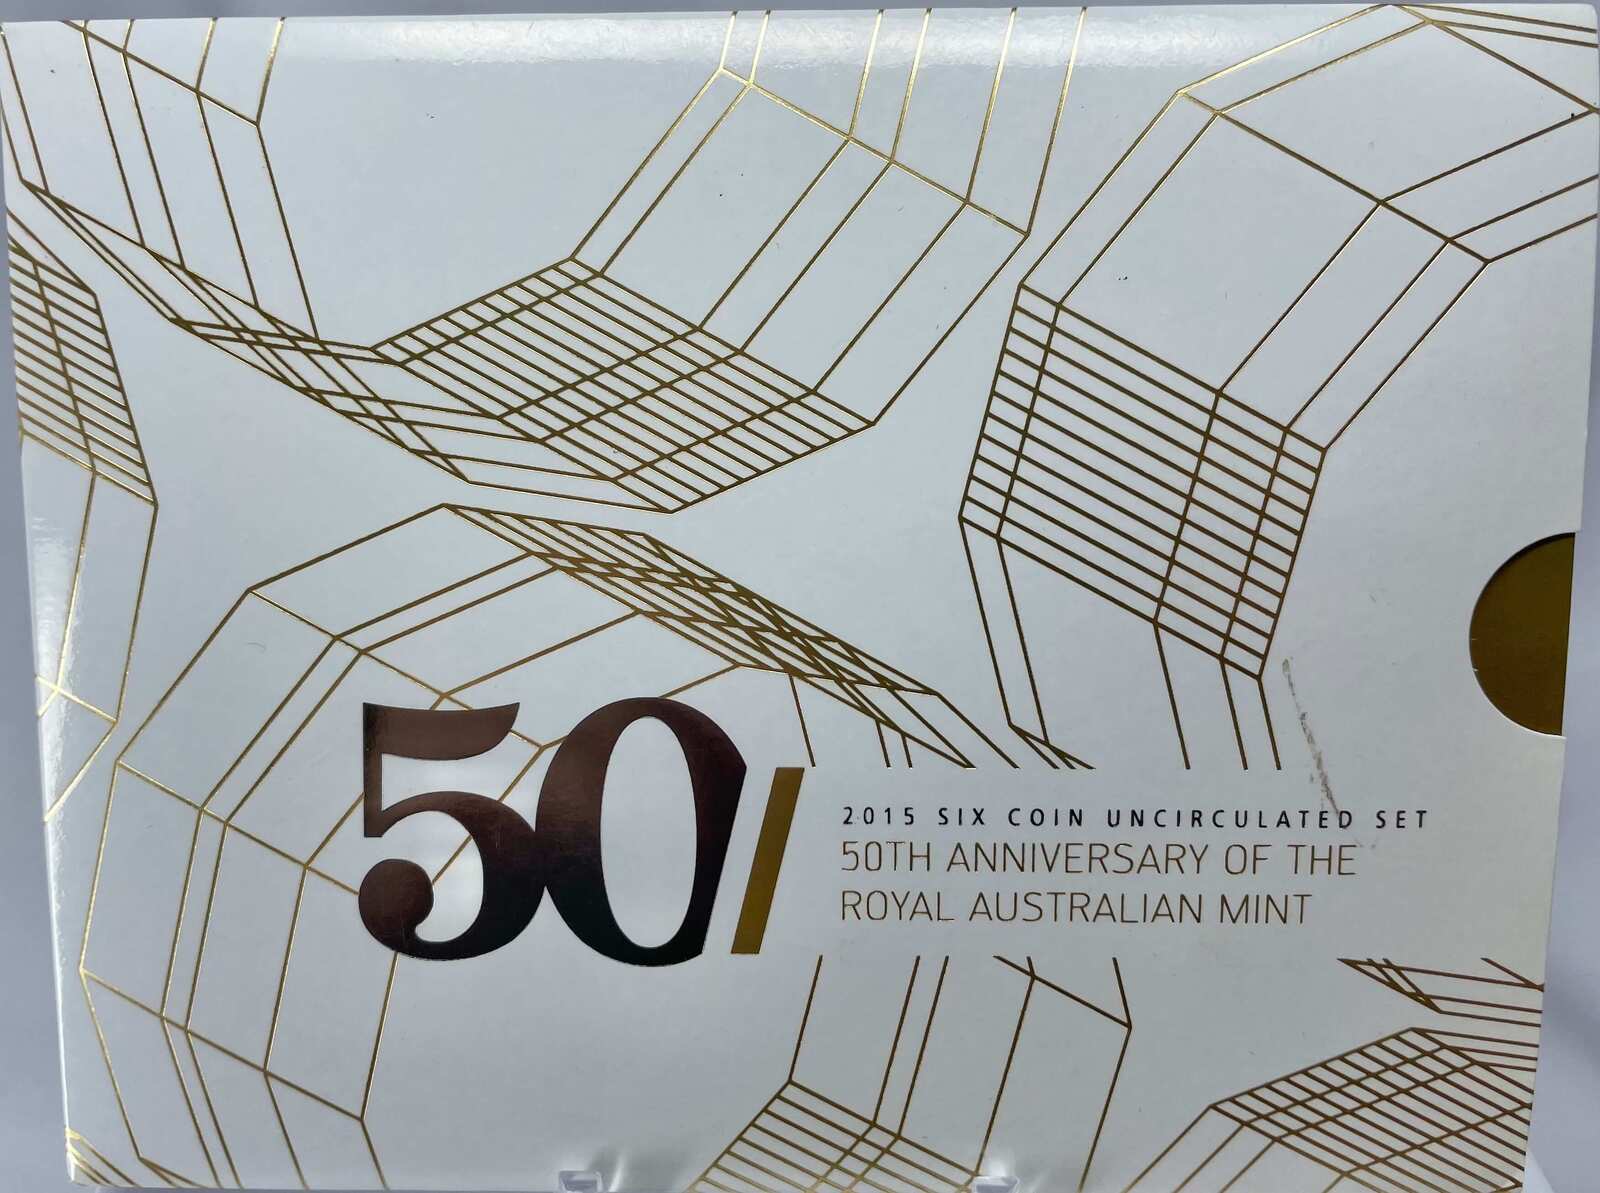 Australia 2015 Uncirculated Mint Coin Set 50th Anniversary of the Royal Australian Mint product image